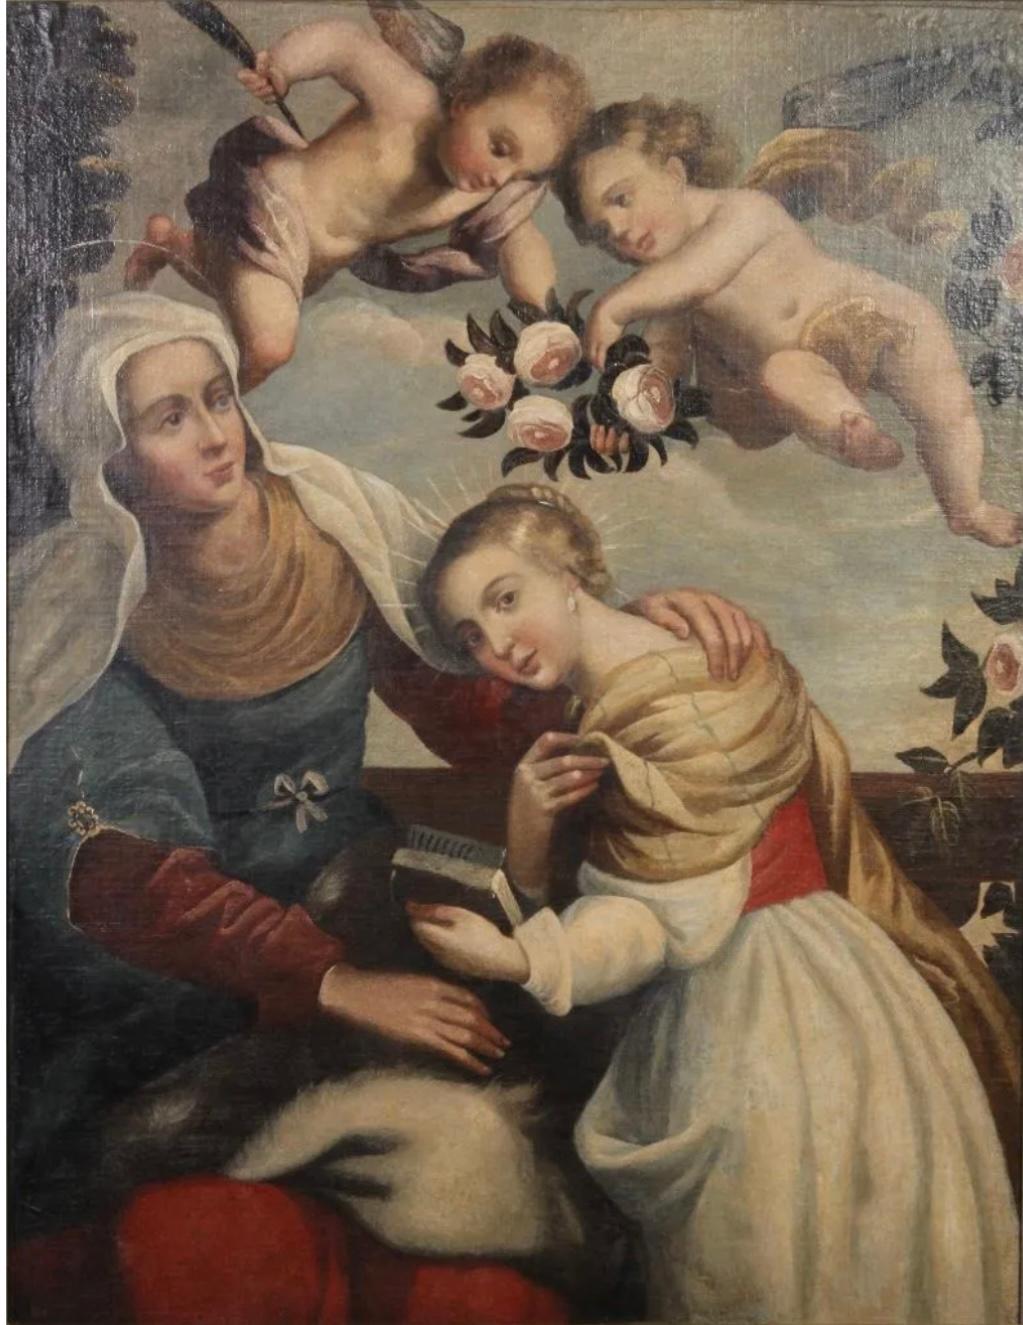 A traditional and characteristic 18th century, Spanish colonial oil on canvas painting
depicting the Virgin Mary holding a book with St. Anne and cherubs holding roses in the characteristic composition depicting the education of the Virgin.